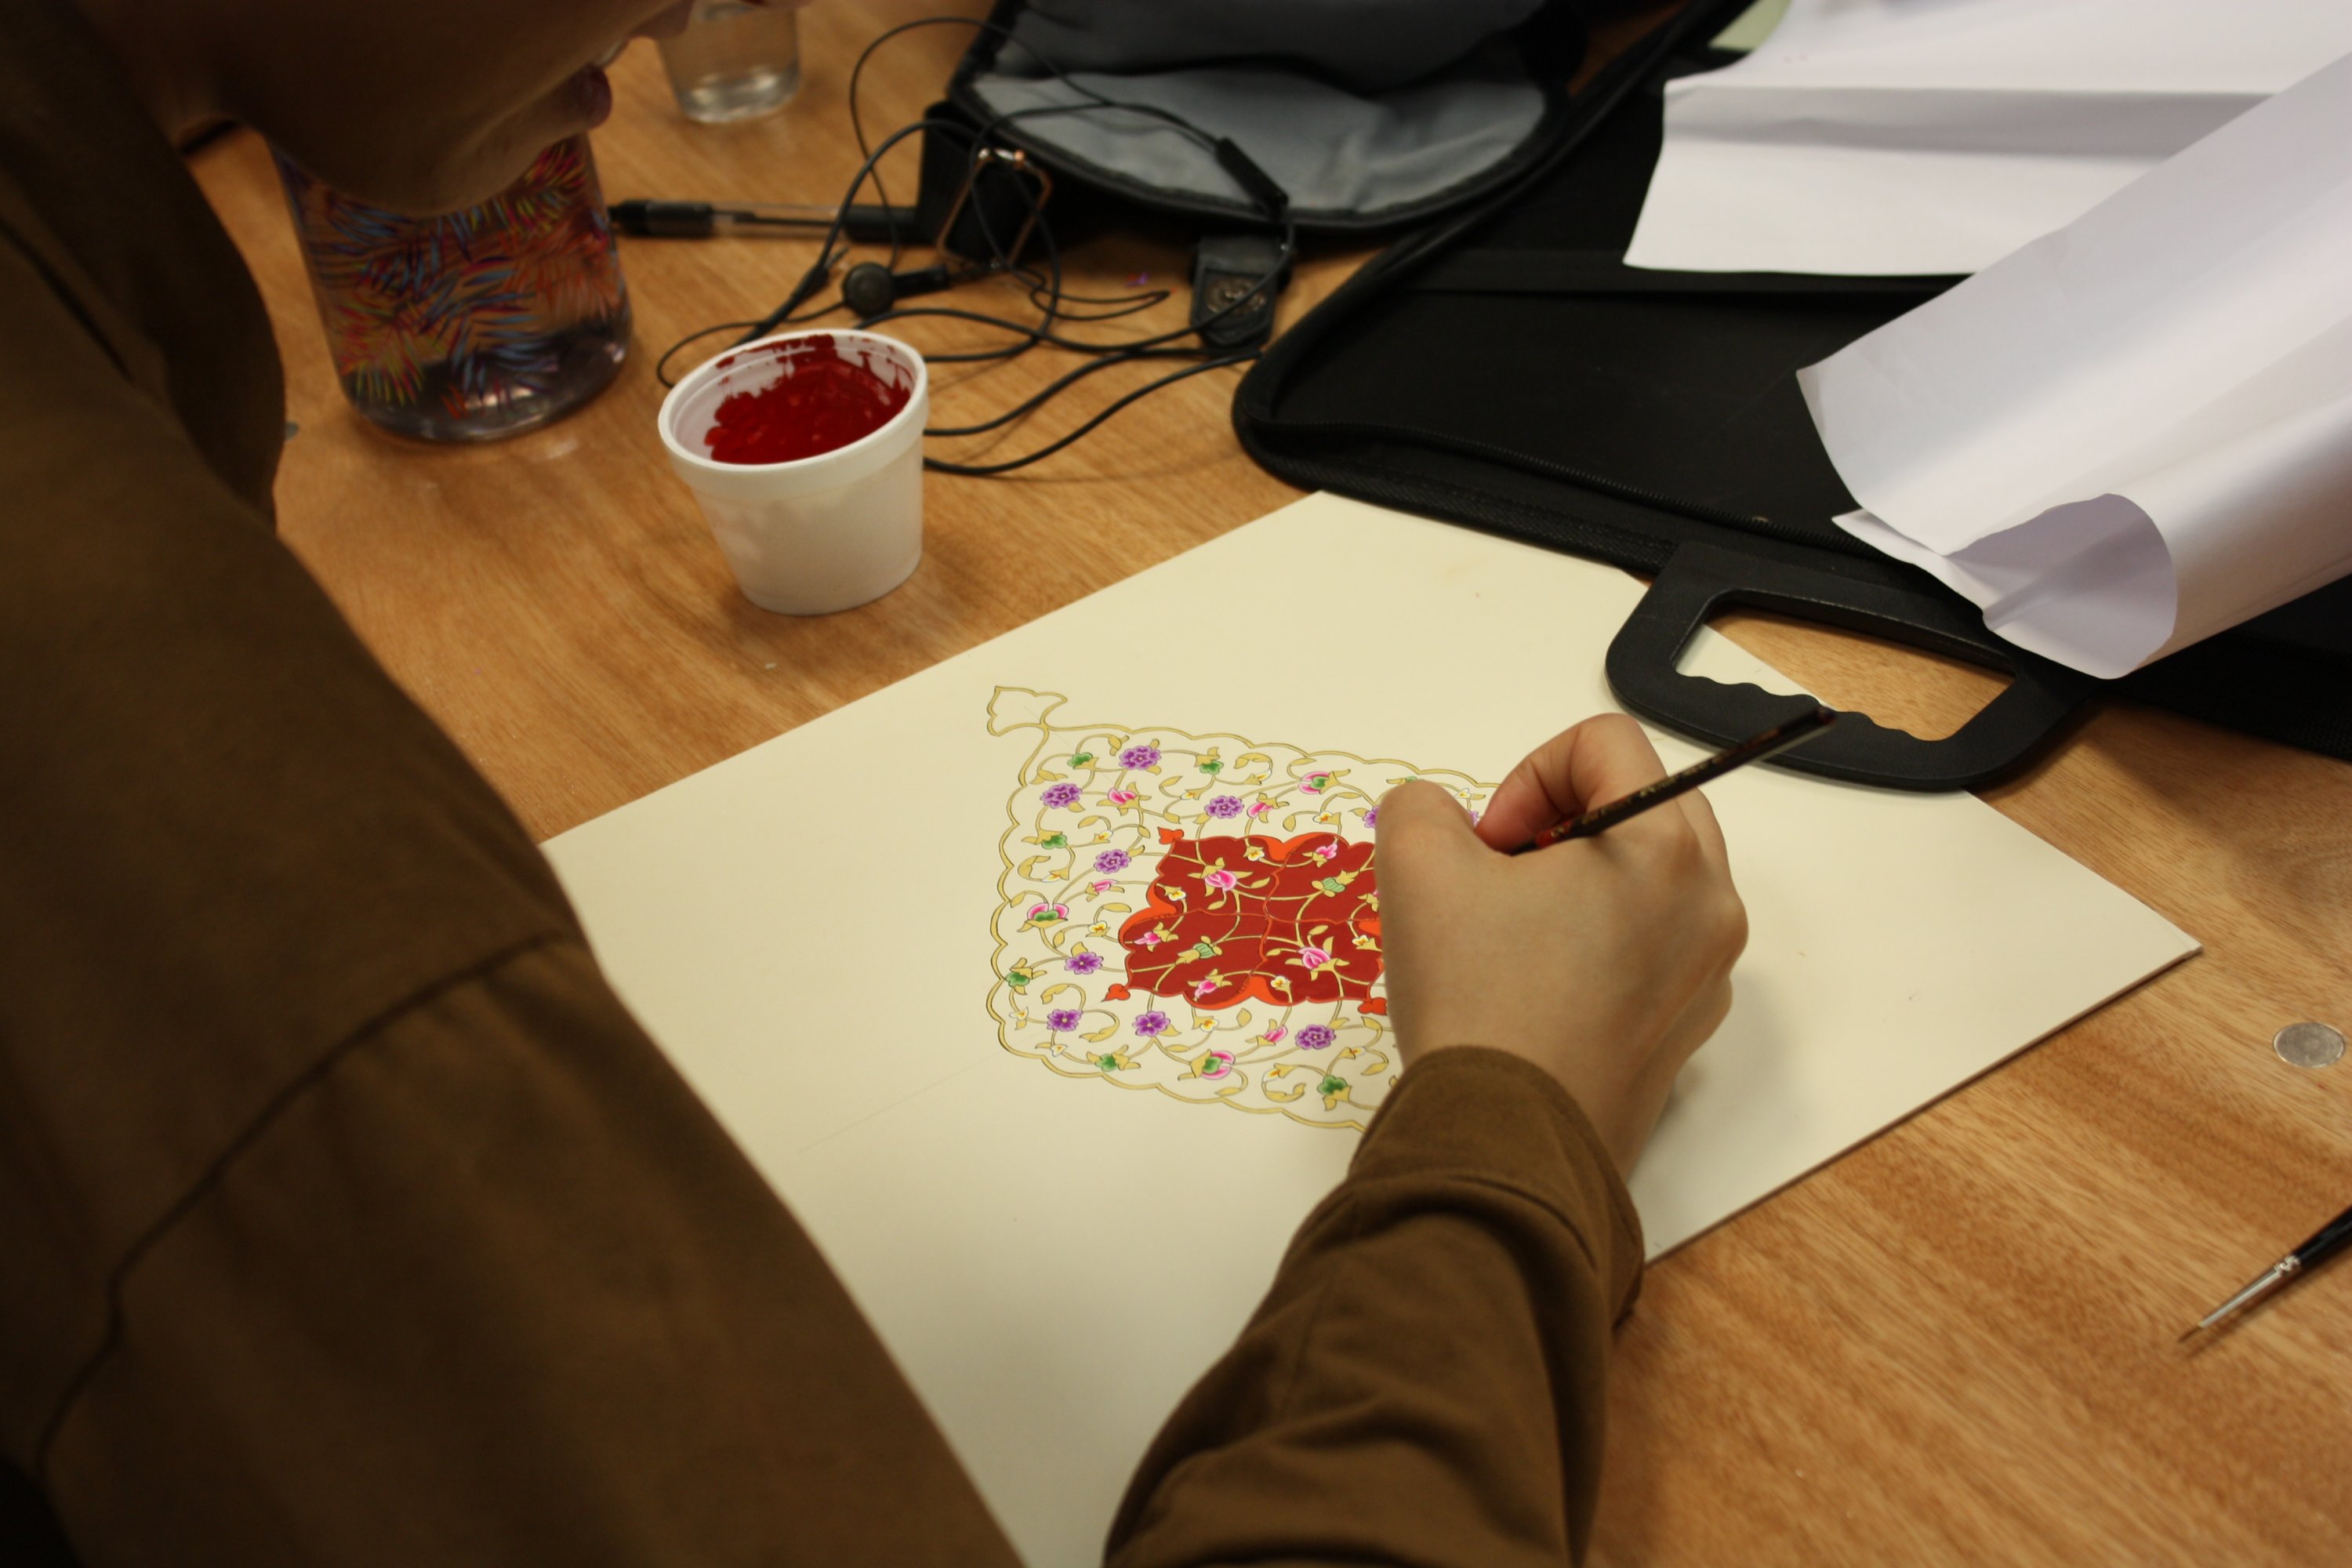 Students practice the art of tezhip at the Yunus Emre Institute London, in London, U.K. (Photo courtesy of Yunus Emre Institute)